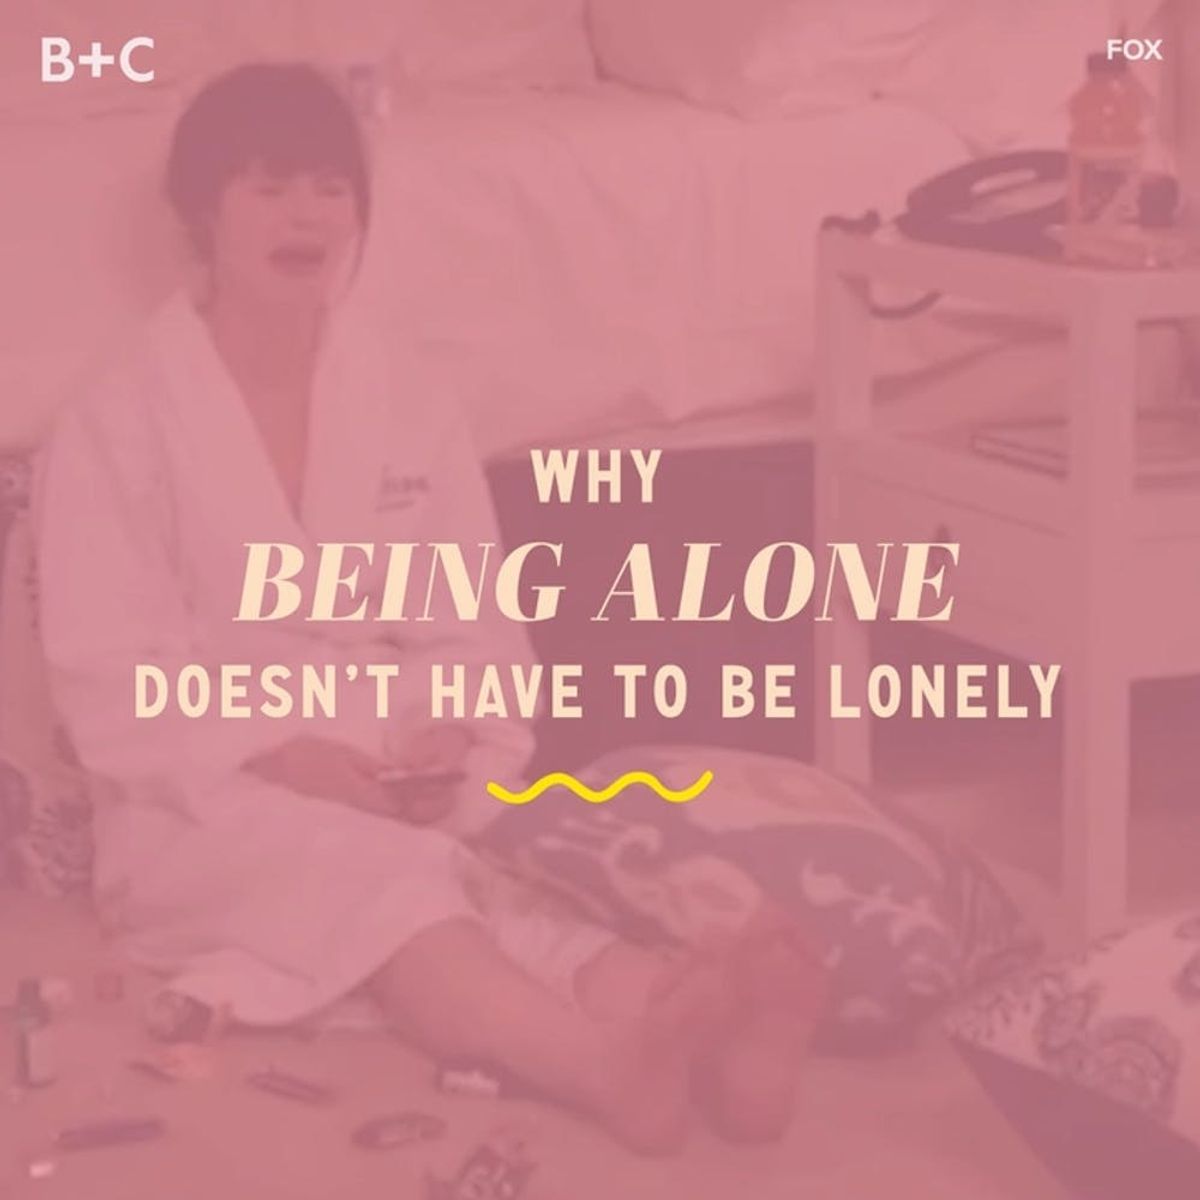 Why Being Alone Doesn’t Have to Be Lonely